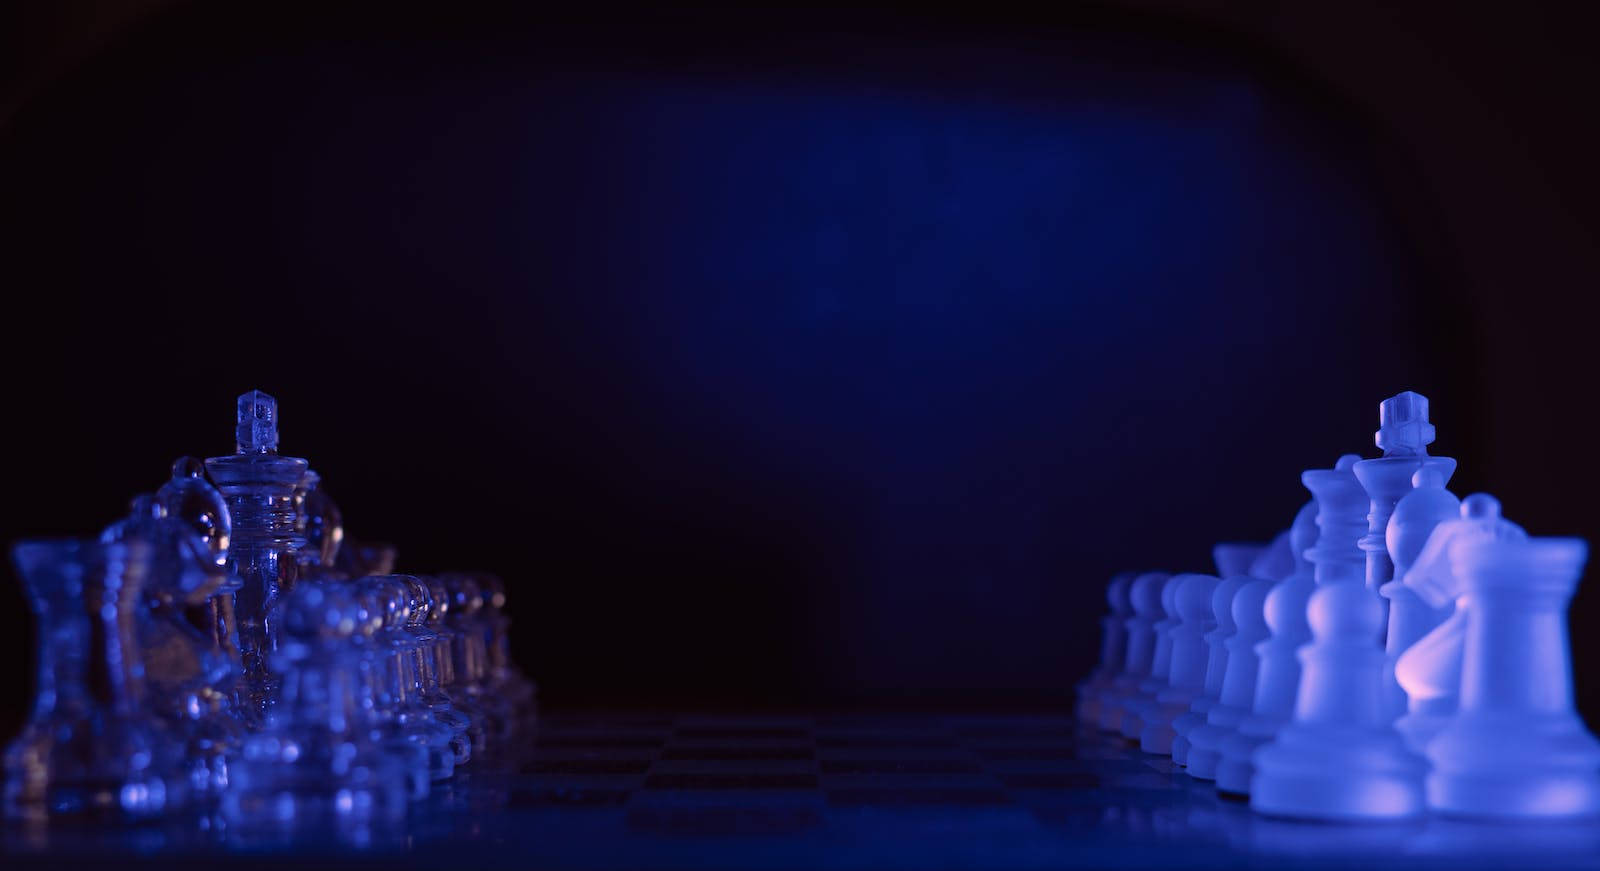 Dark And Blue Aesthetic Laptop Chess Background Wallpaper